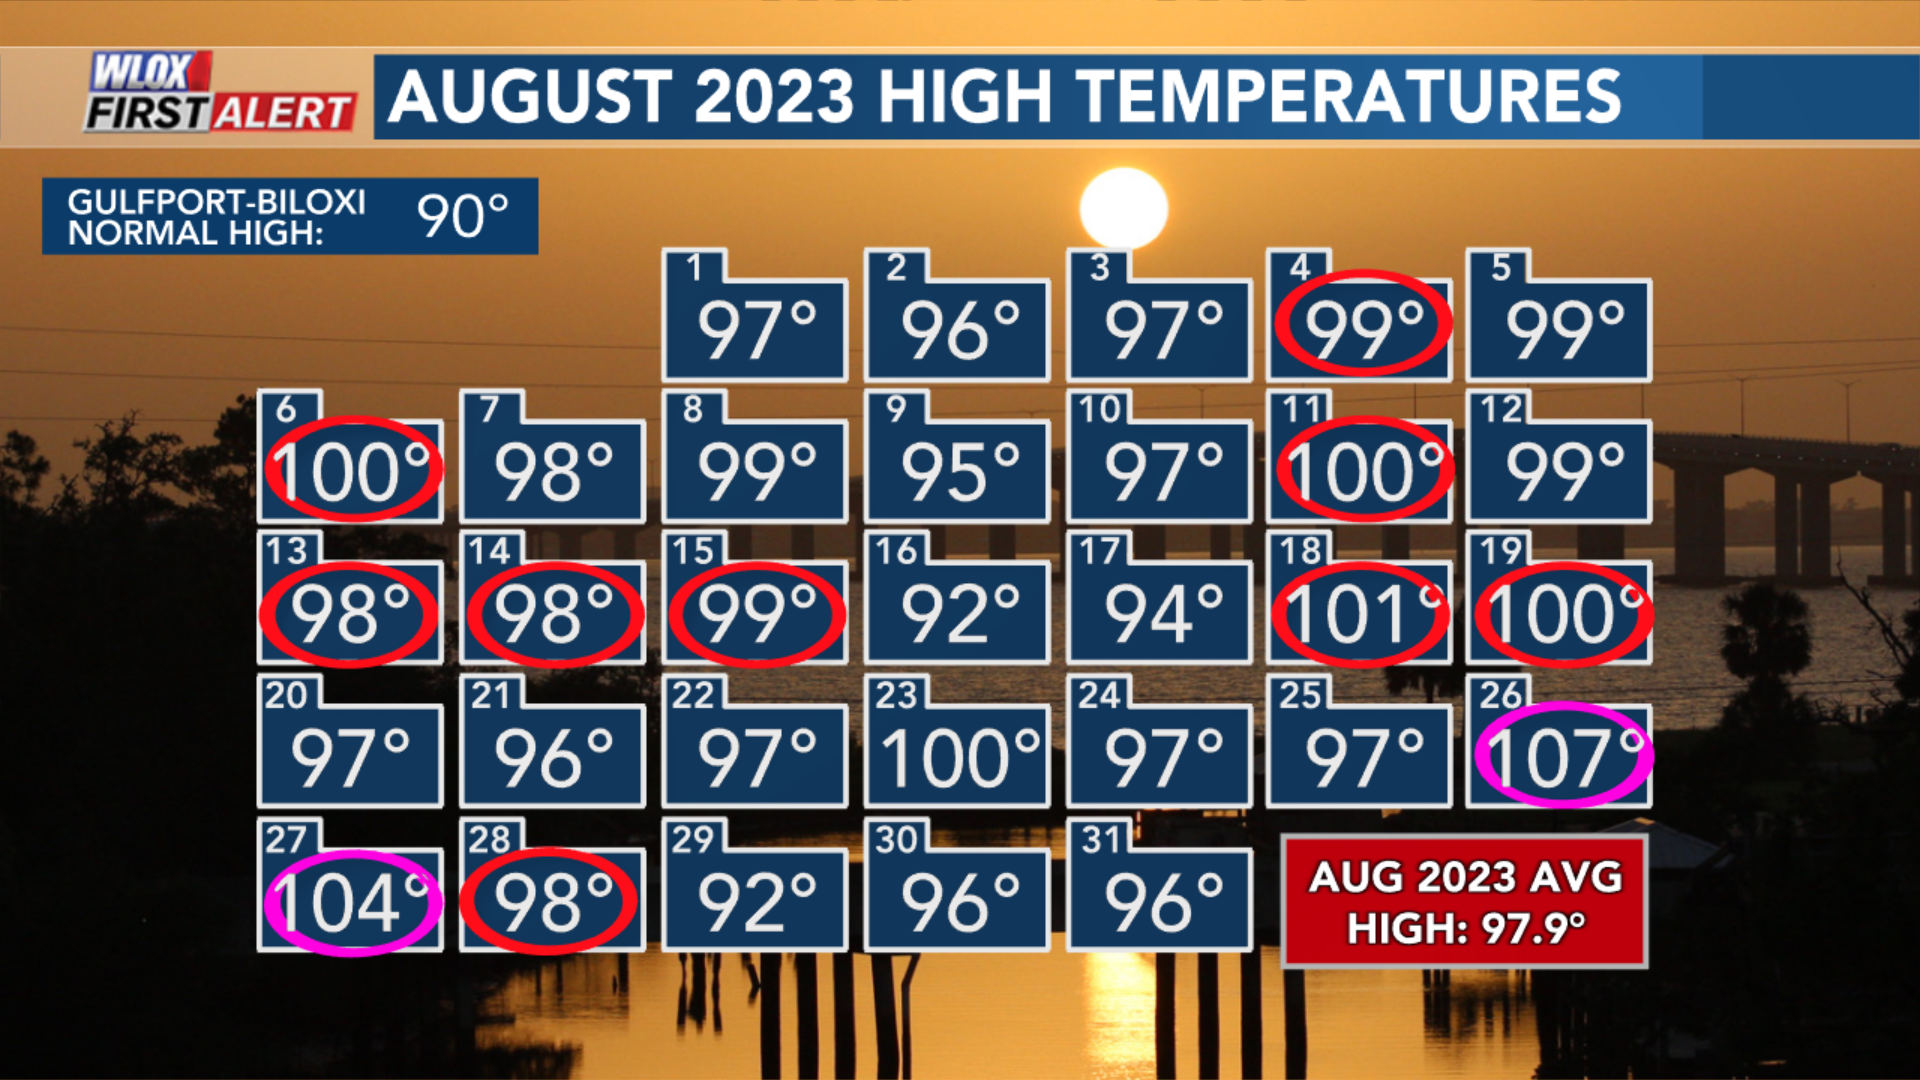 Nws Summer 2023 Hottest On Record For